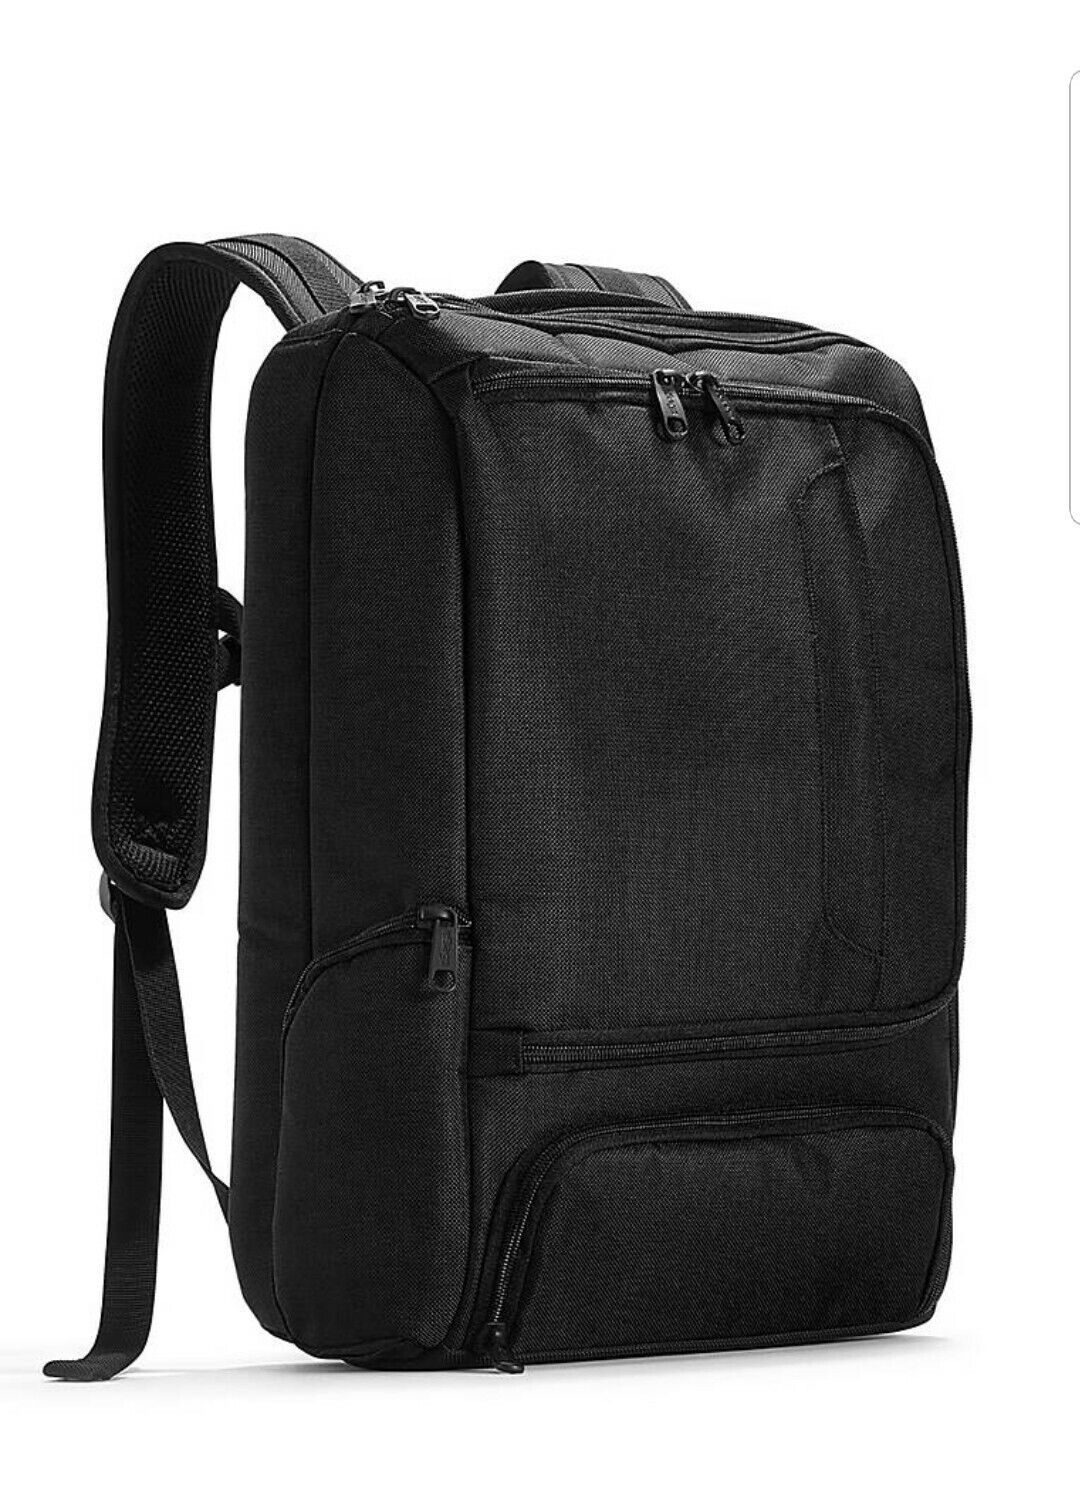 eBags Professional Slim Pro Slim Laptop Backpack, Solid Black, New with Tag